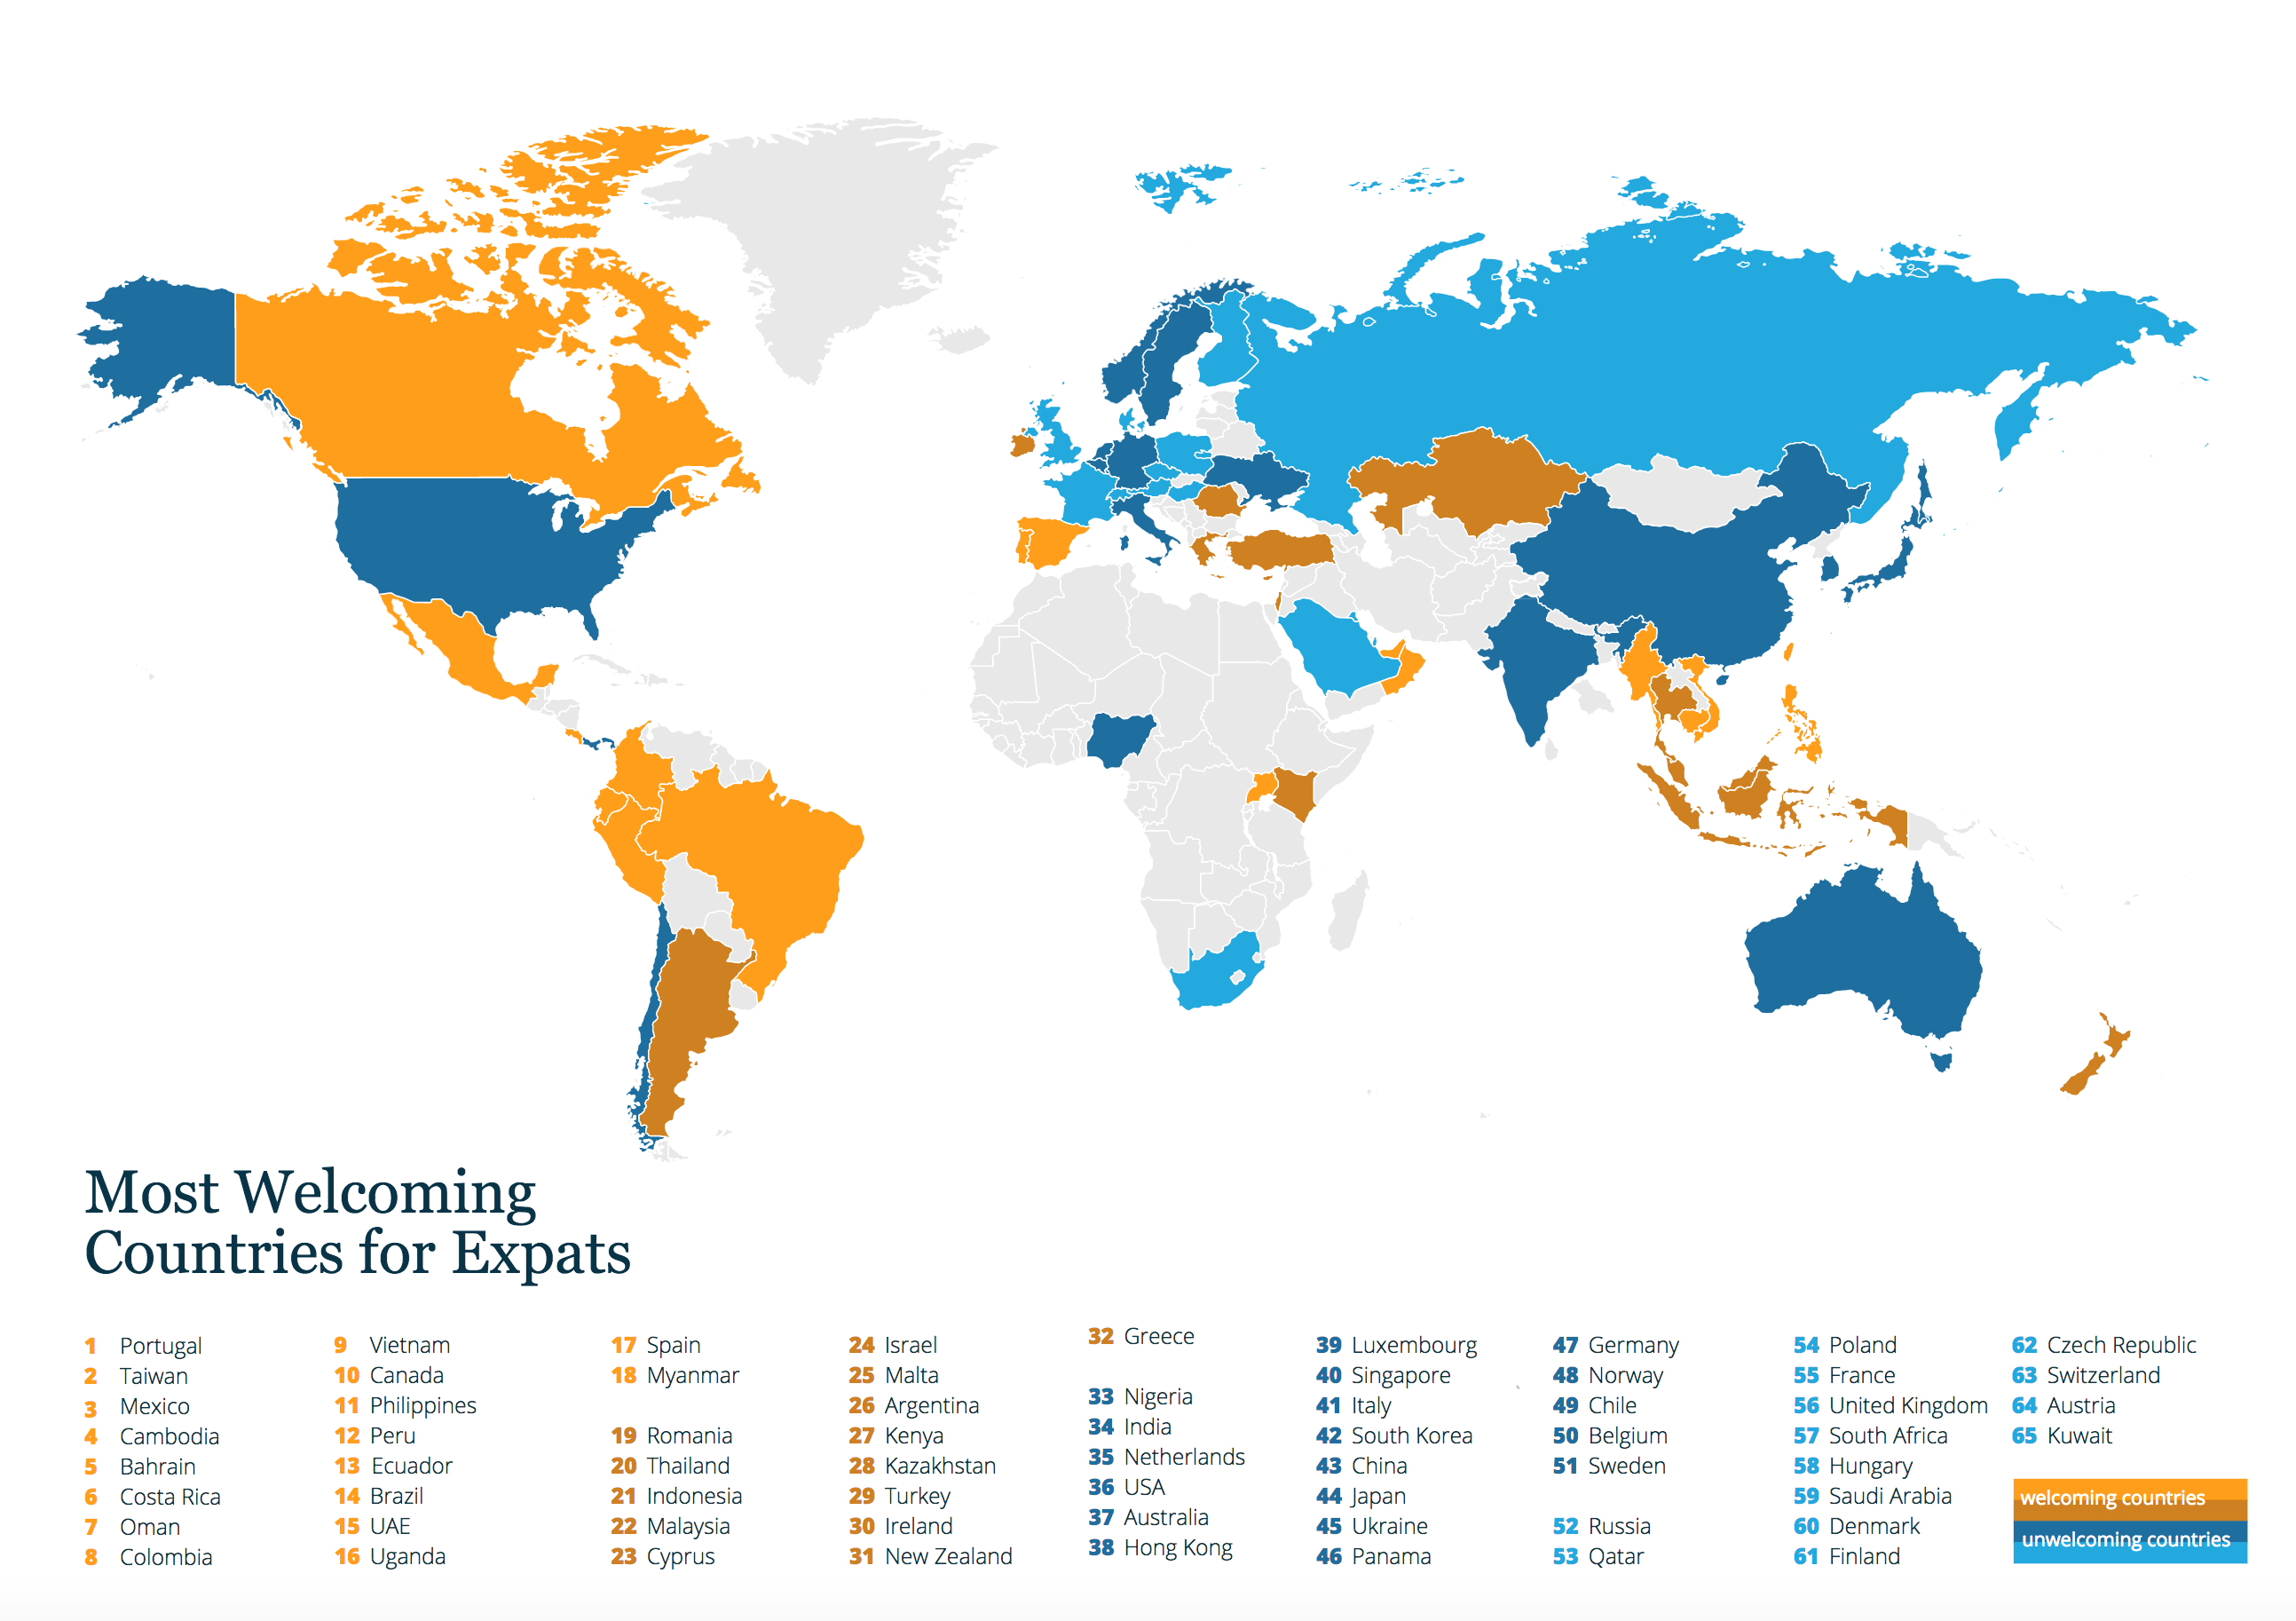 Most welcoming countries for expats infographic